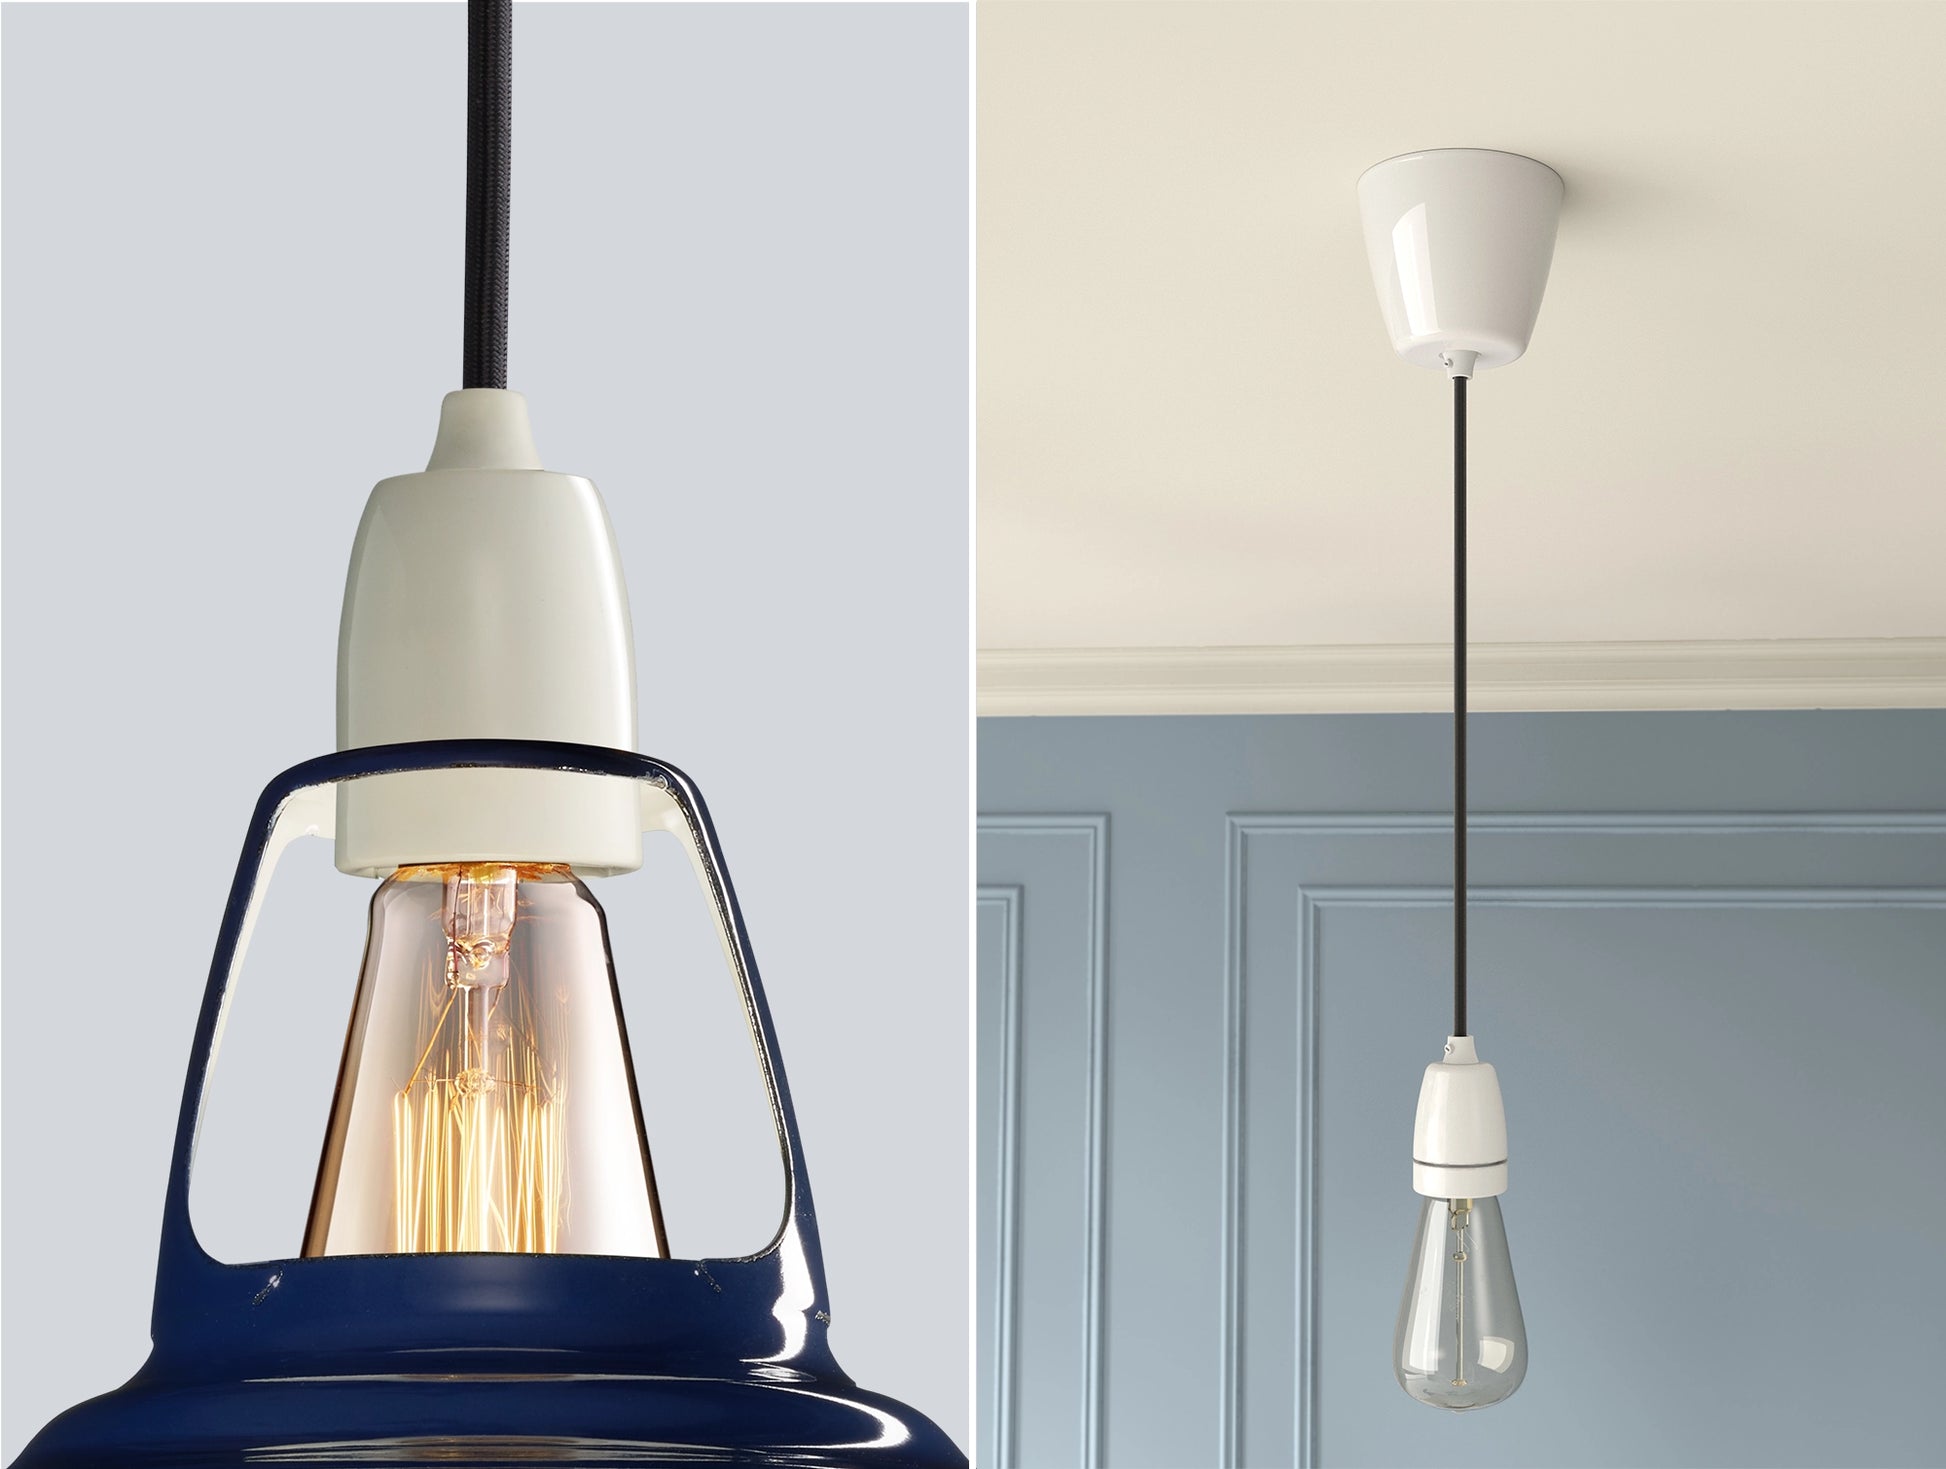 Close up of an E27 Porcelain suspension set on a Royal Blue lampshade on the left. On the right, an E27 Porcelain pendant set with a lightbulb is hanging from the ceiling